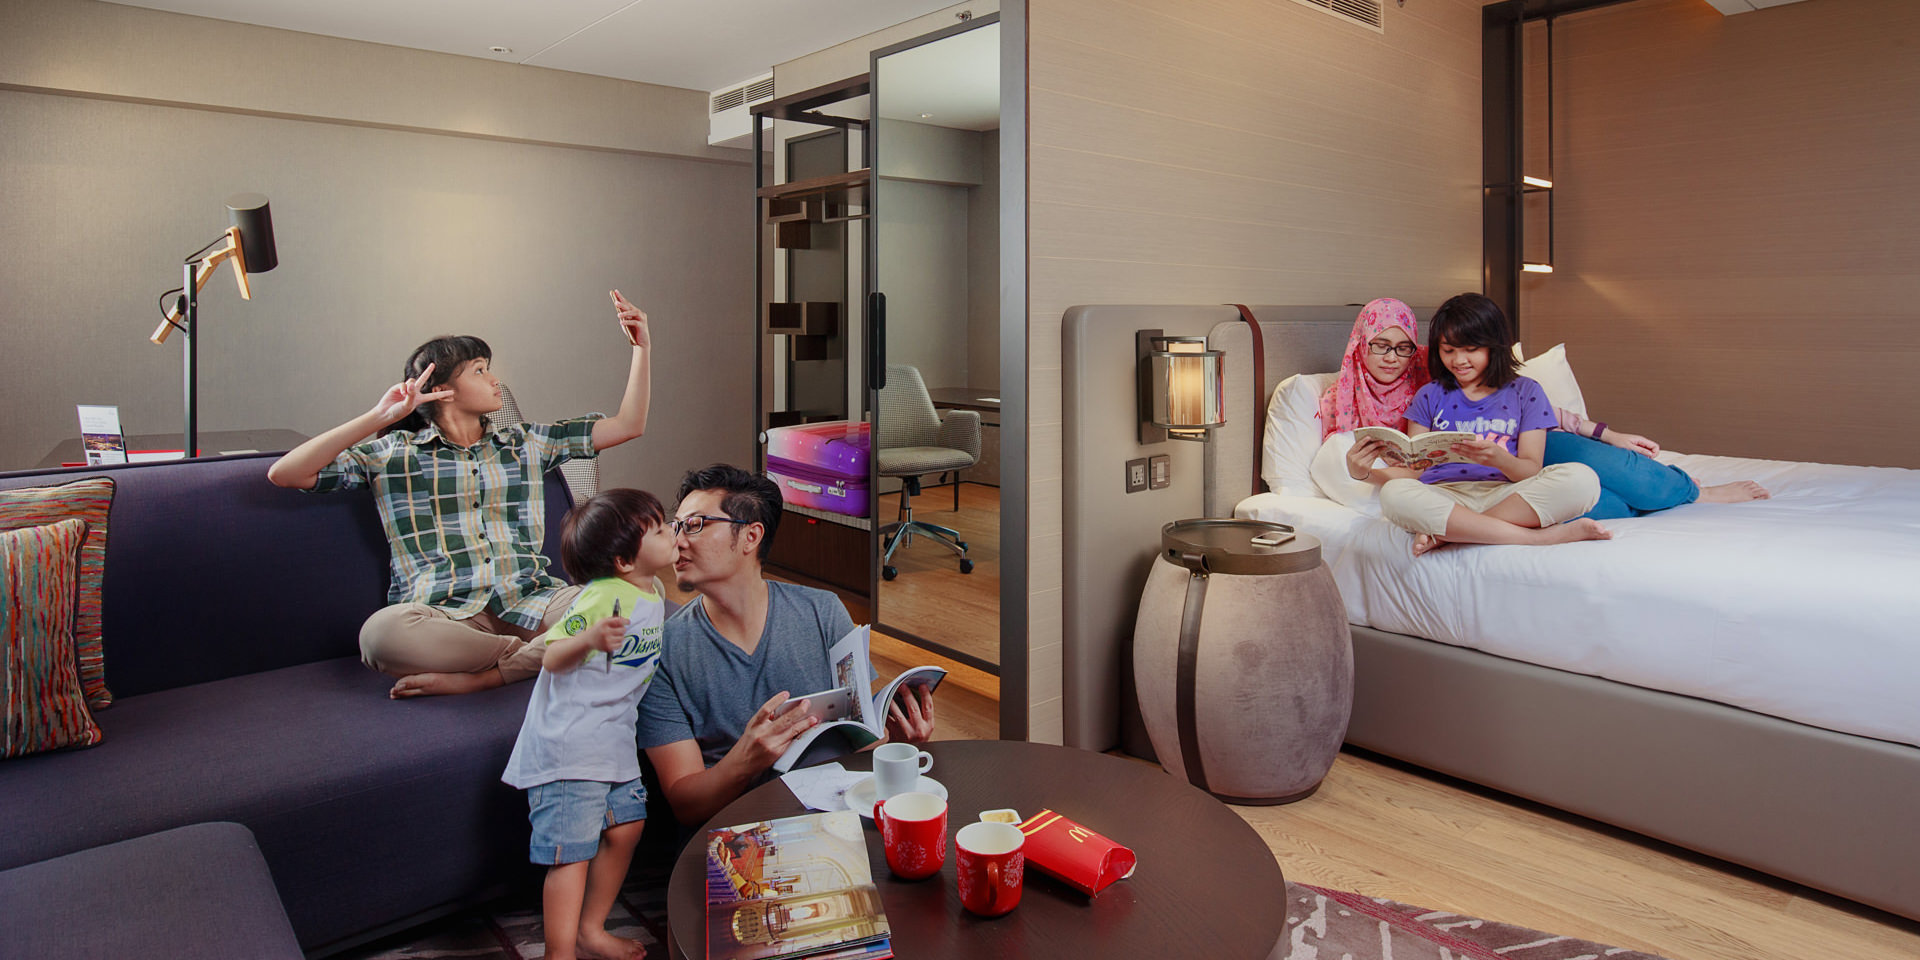 Family photo by Singapore based award-winning commercial photographer. Specializes in a variety of commercial work ranging from portrait, food and interior photography.